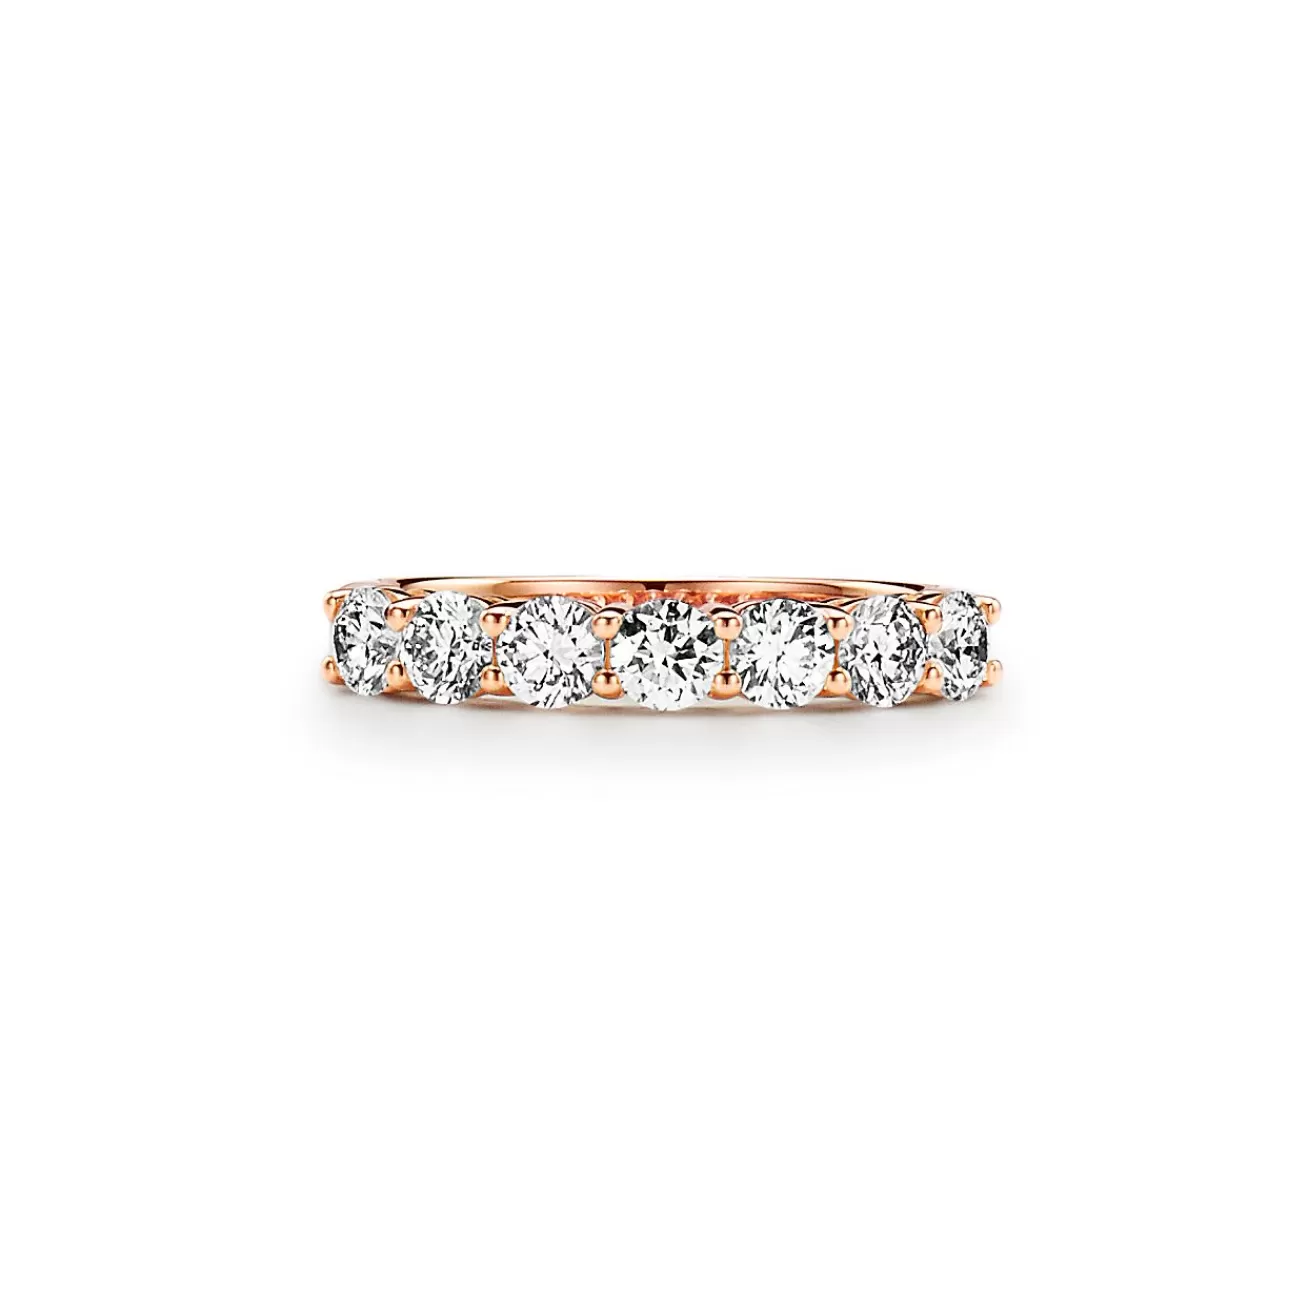 Tiffany & Co. Tiffany Forever Band Ring in Rose Gold with a Half-circle of Diamonds, 3.5 mm | ^Women Rings | Rose Gold Jewelry